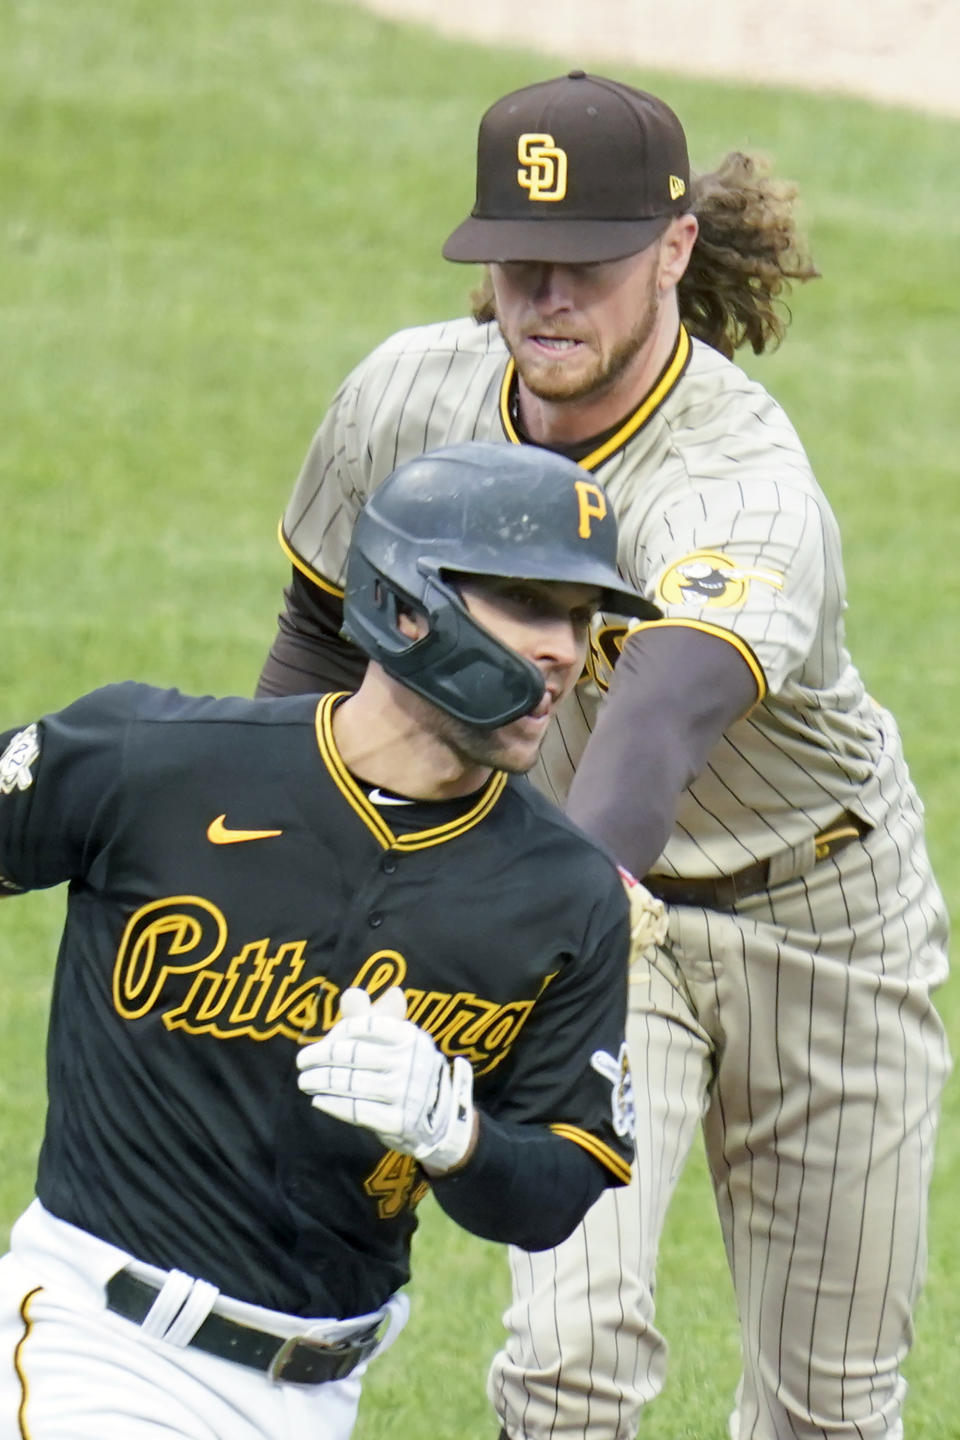 San Diego Padres starting pitcher Chris Paddack, top, tags out Pittsburgh Pirates' Adam Frazier as he heads to first after hitting a ground ball in the second inning of a baseball game, Thursday, April 15, 2021, in Pittsburgh. (AP Photo/Keith Srakocic)